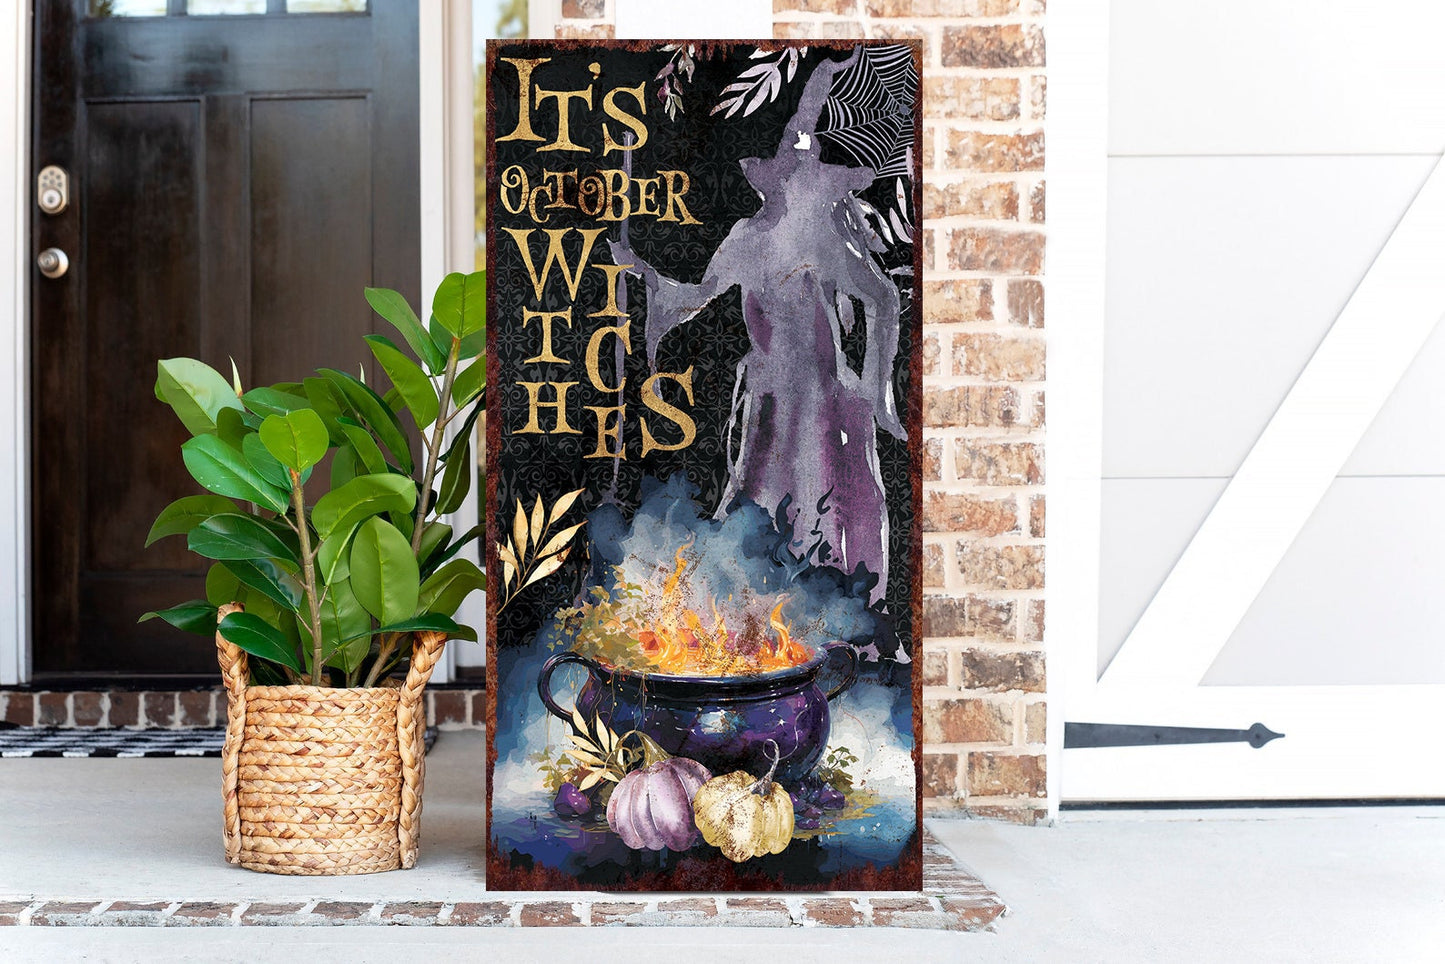 36in It's October Witches Halloween Porch Sign - Front Porch Halloween Welcome Sign, Rustic Modern Farmhouse Entryway Decor